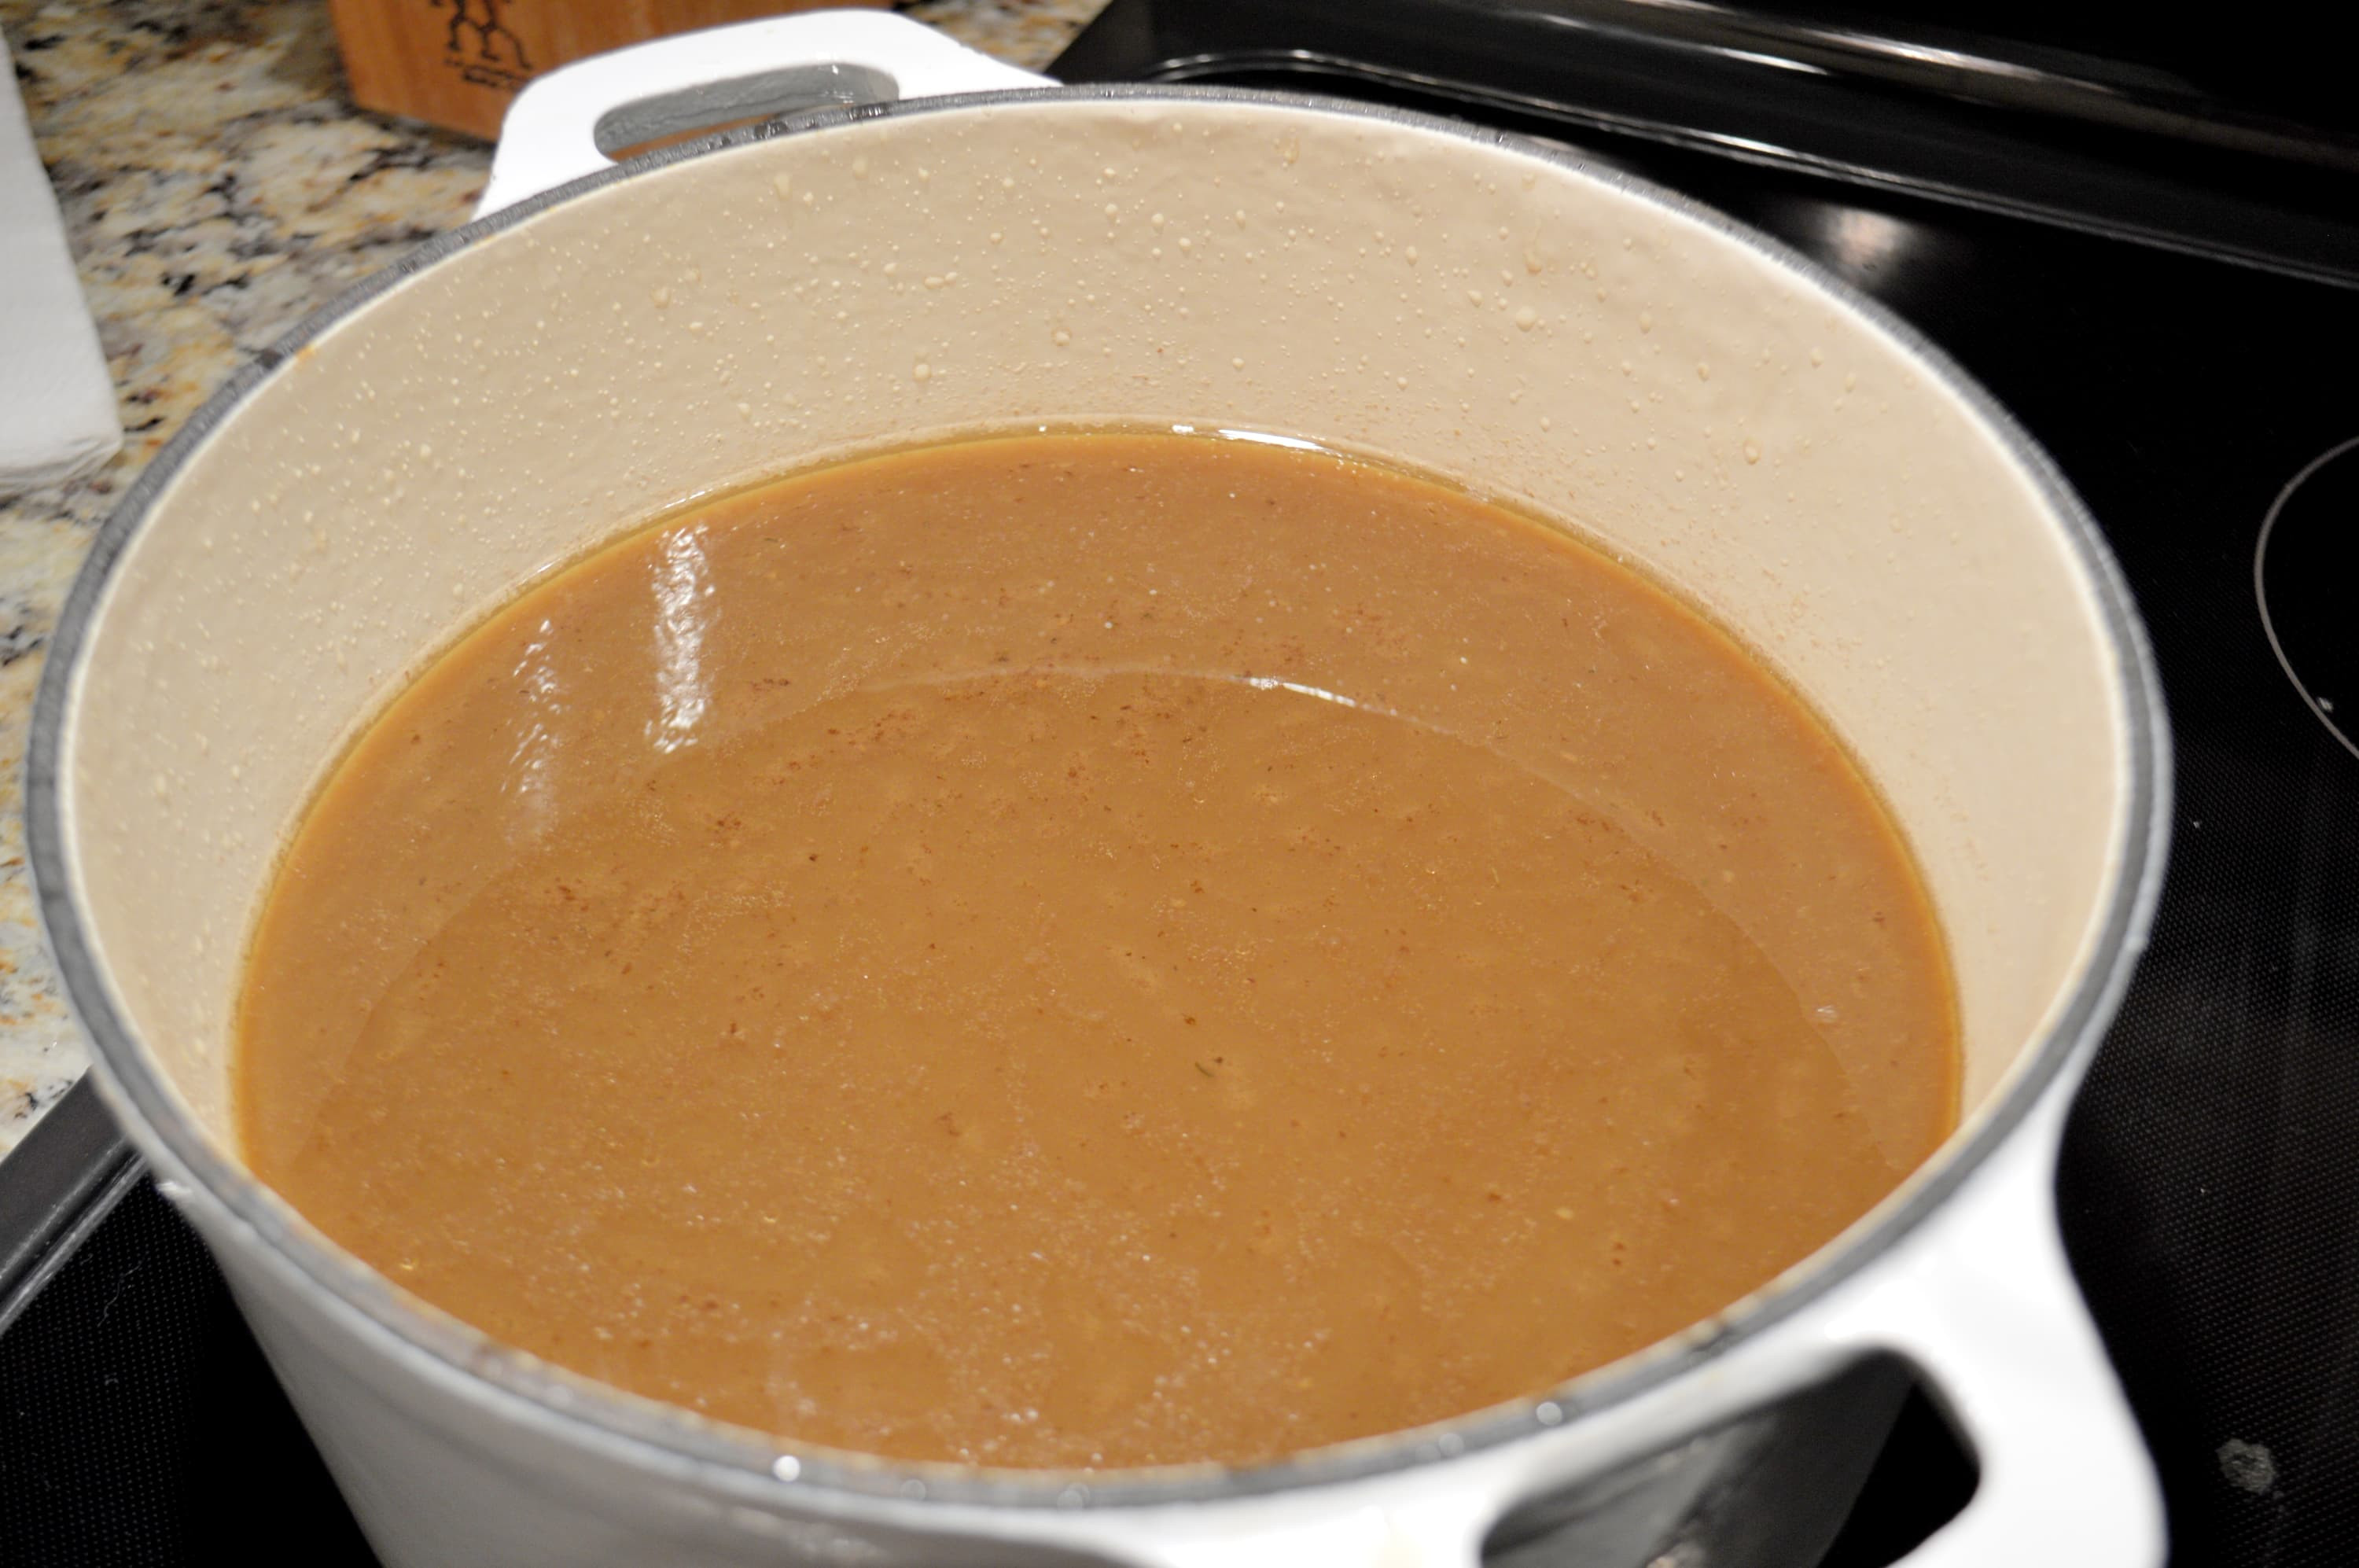 How To Make Gravy With Beef Broth
 beef gravy from beef broth